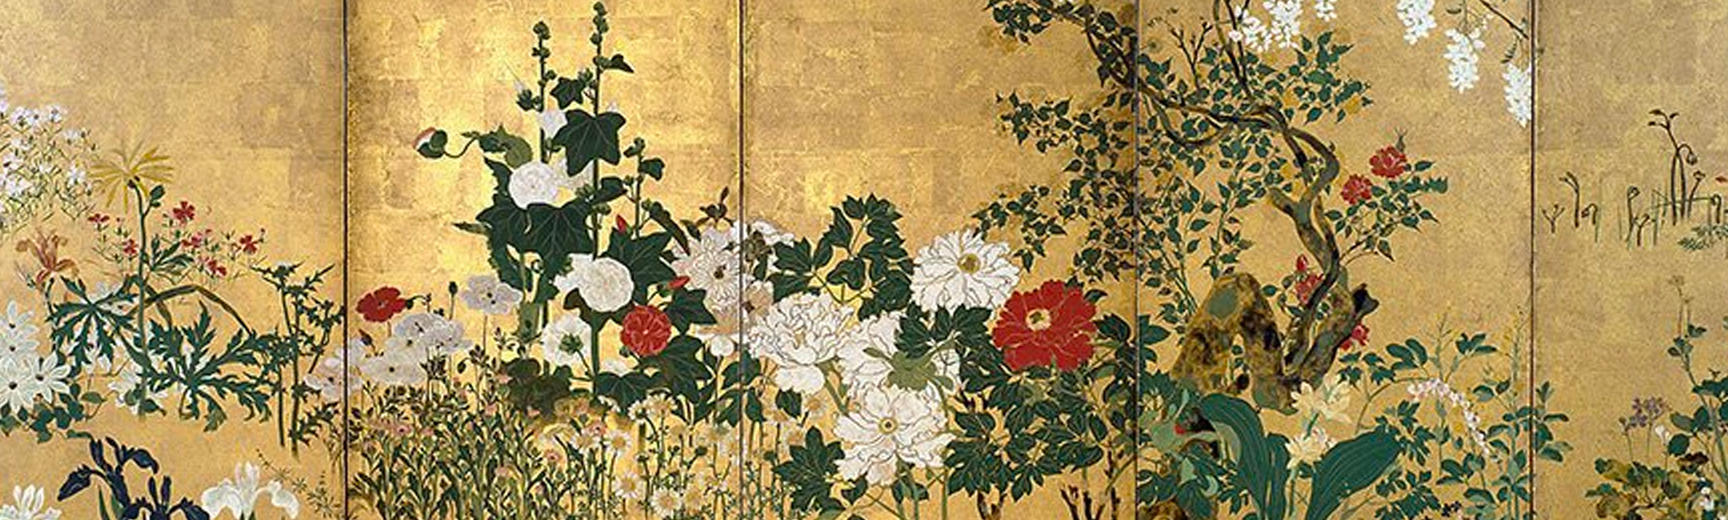 Artwork with colourful red and white flowers on a golden background